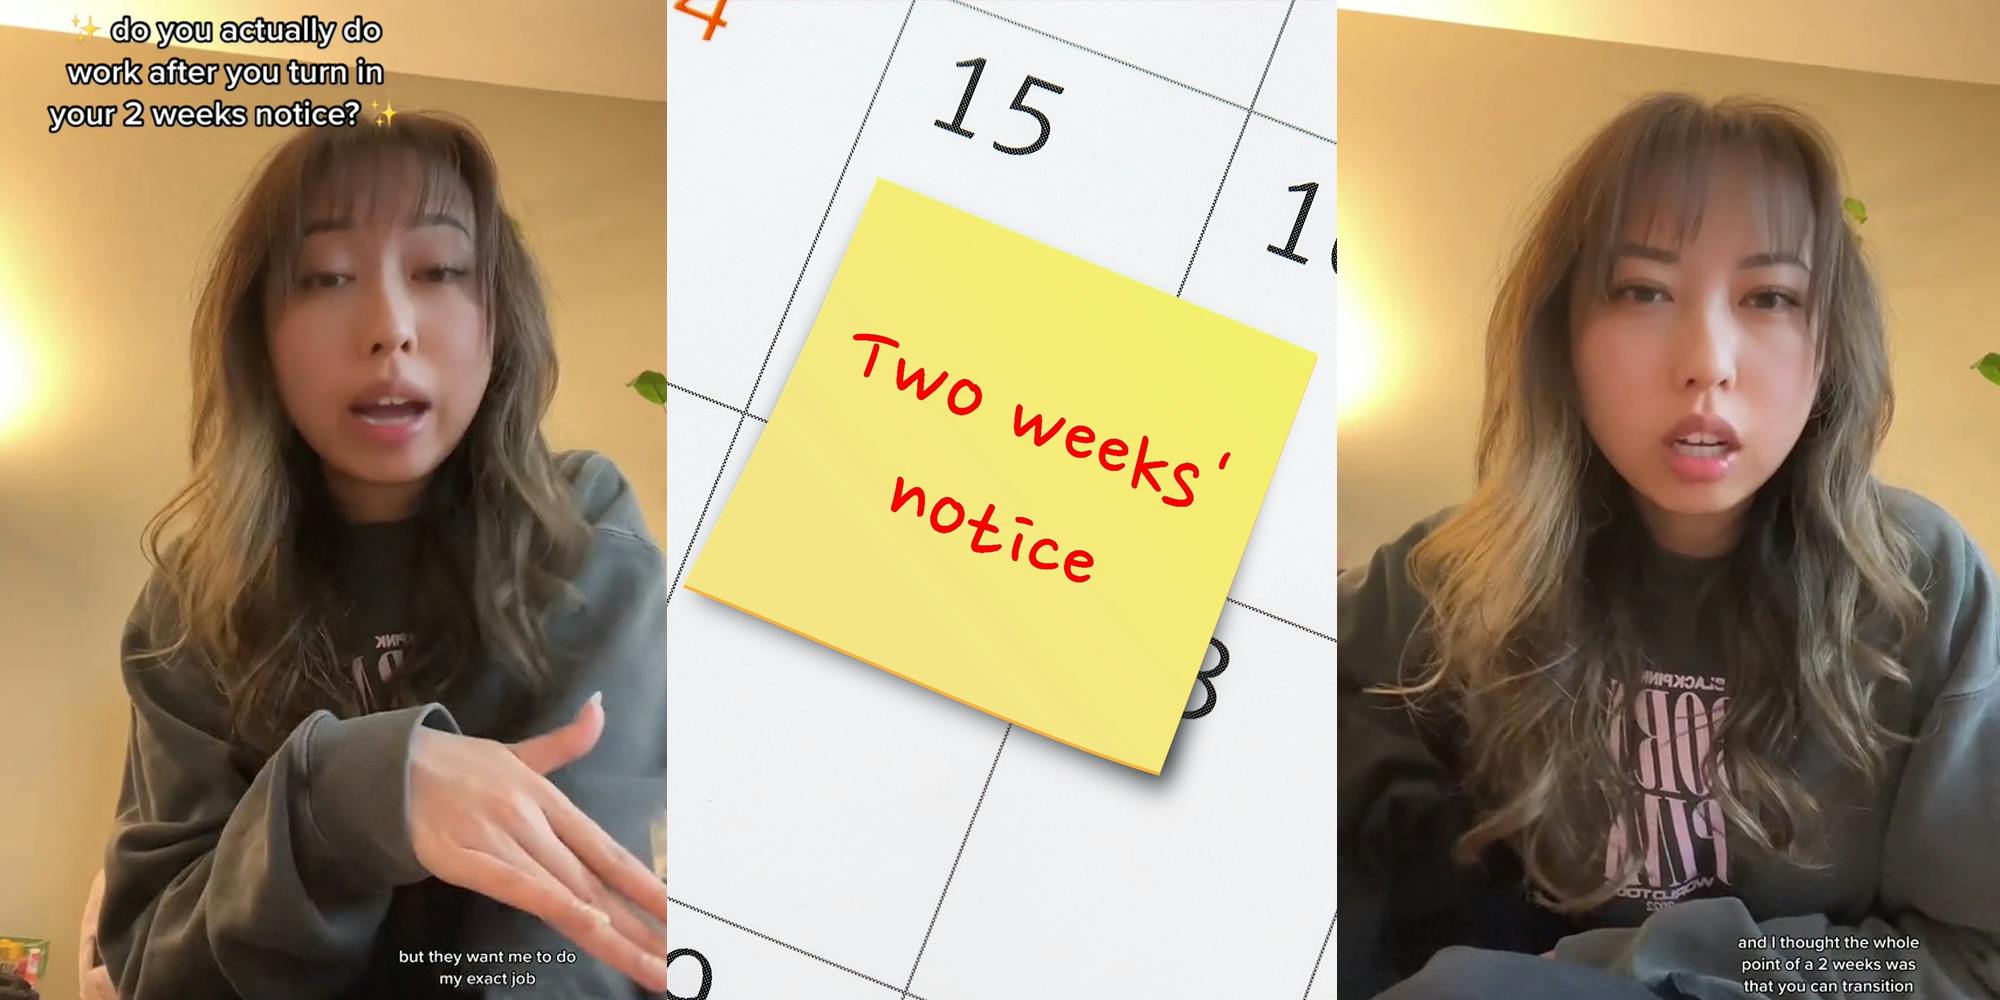 worker speaking with caption "do you actually do work after you turn in your 2 weeks notice? but they want me to do my exact job" (l) Two weeks notice sticky note on calendar (c) worker speaking with caption "and I thought the whole point of a 2 weks was that you can transition" (r)